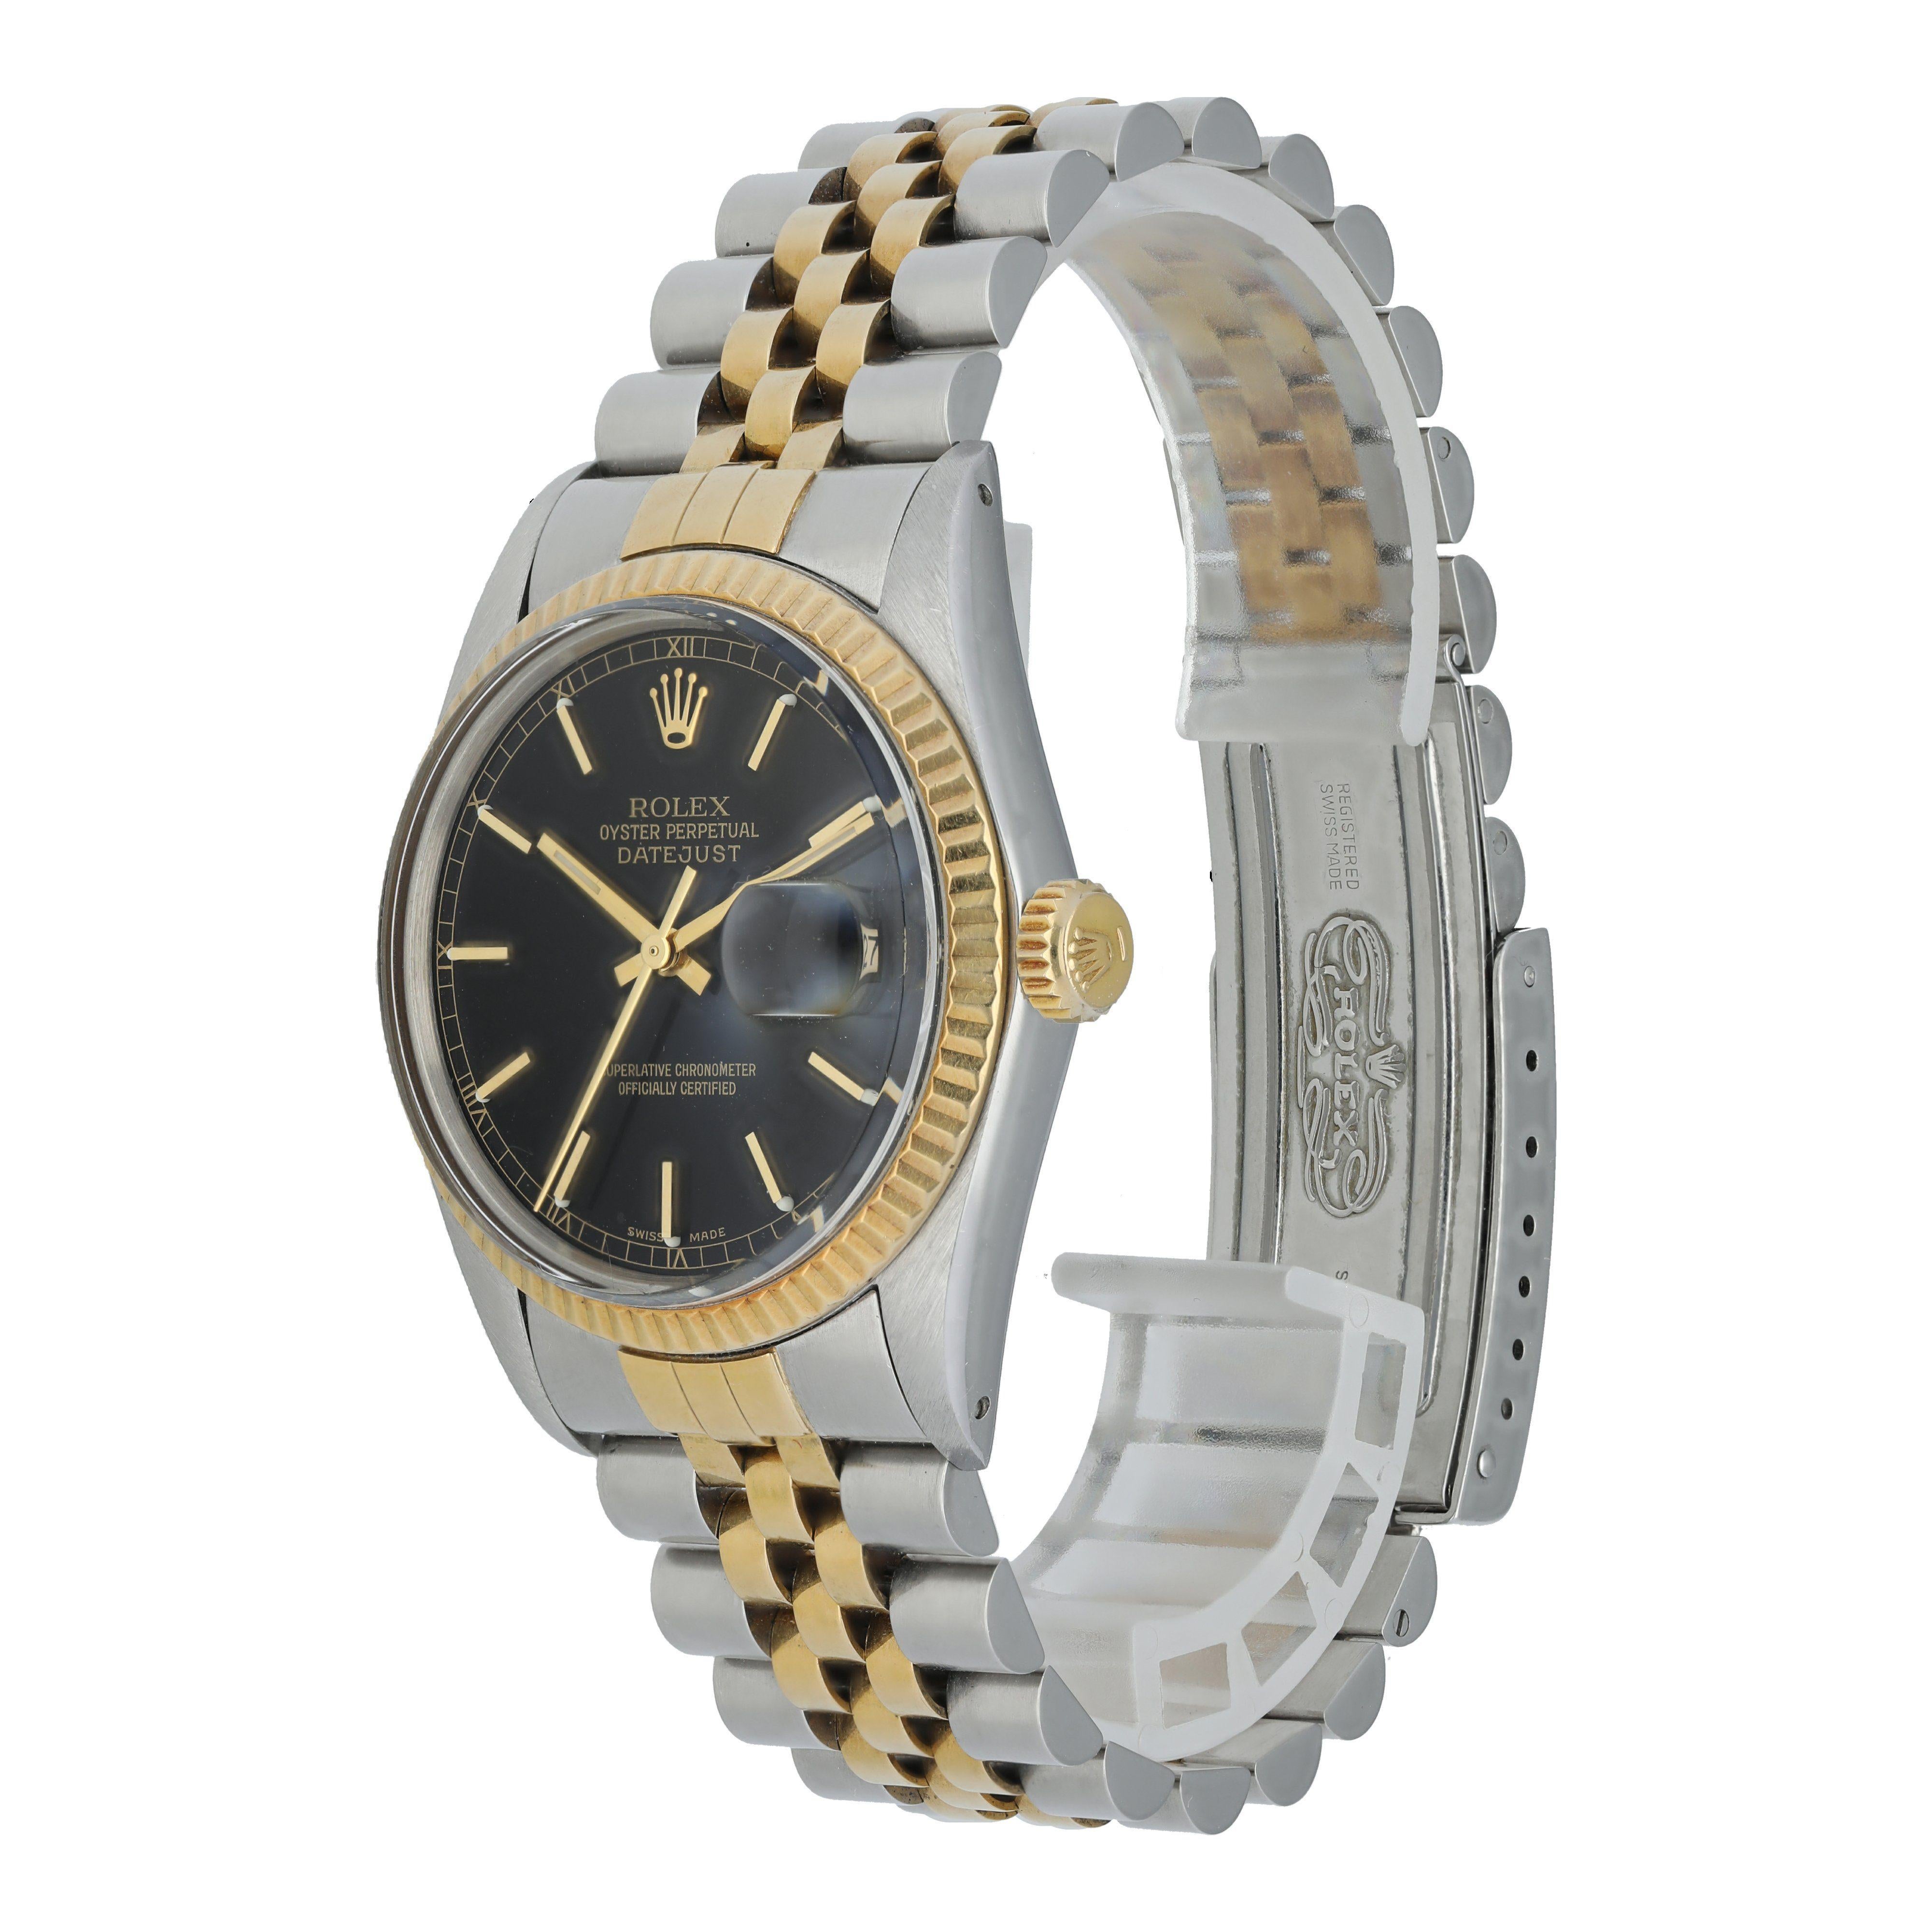 Rolex Datejust 16013 Black Dial Men Watch.
36mm stainless steel case with yellow gold fluted bezel.
Black dial with luminous gold hands and index hour markers
Minute markers around the outer dial.
Date display at the 3 o'clock position.
Two-tone